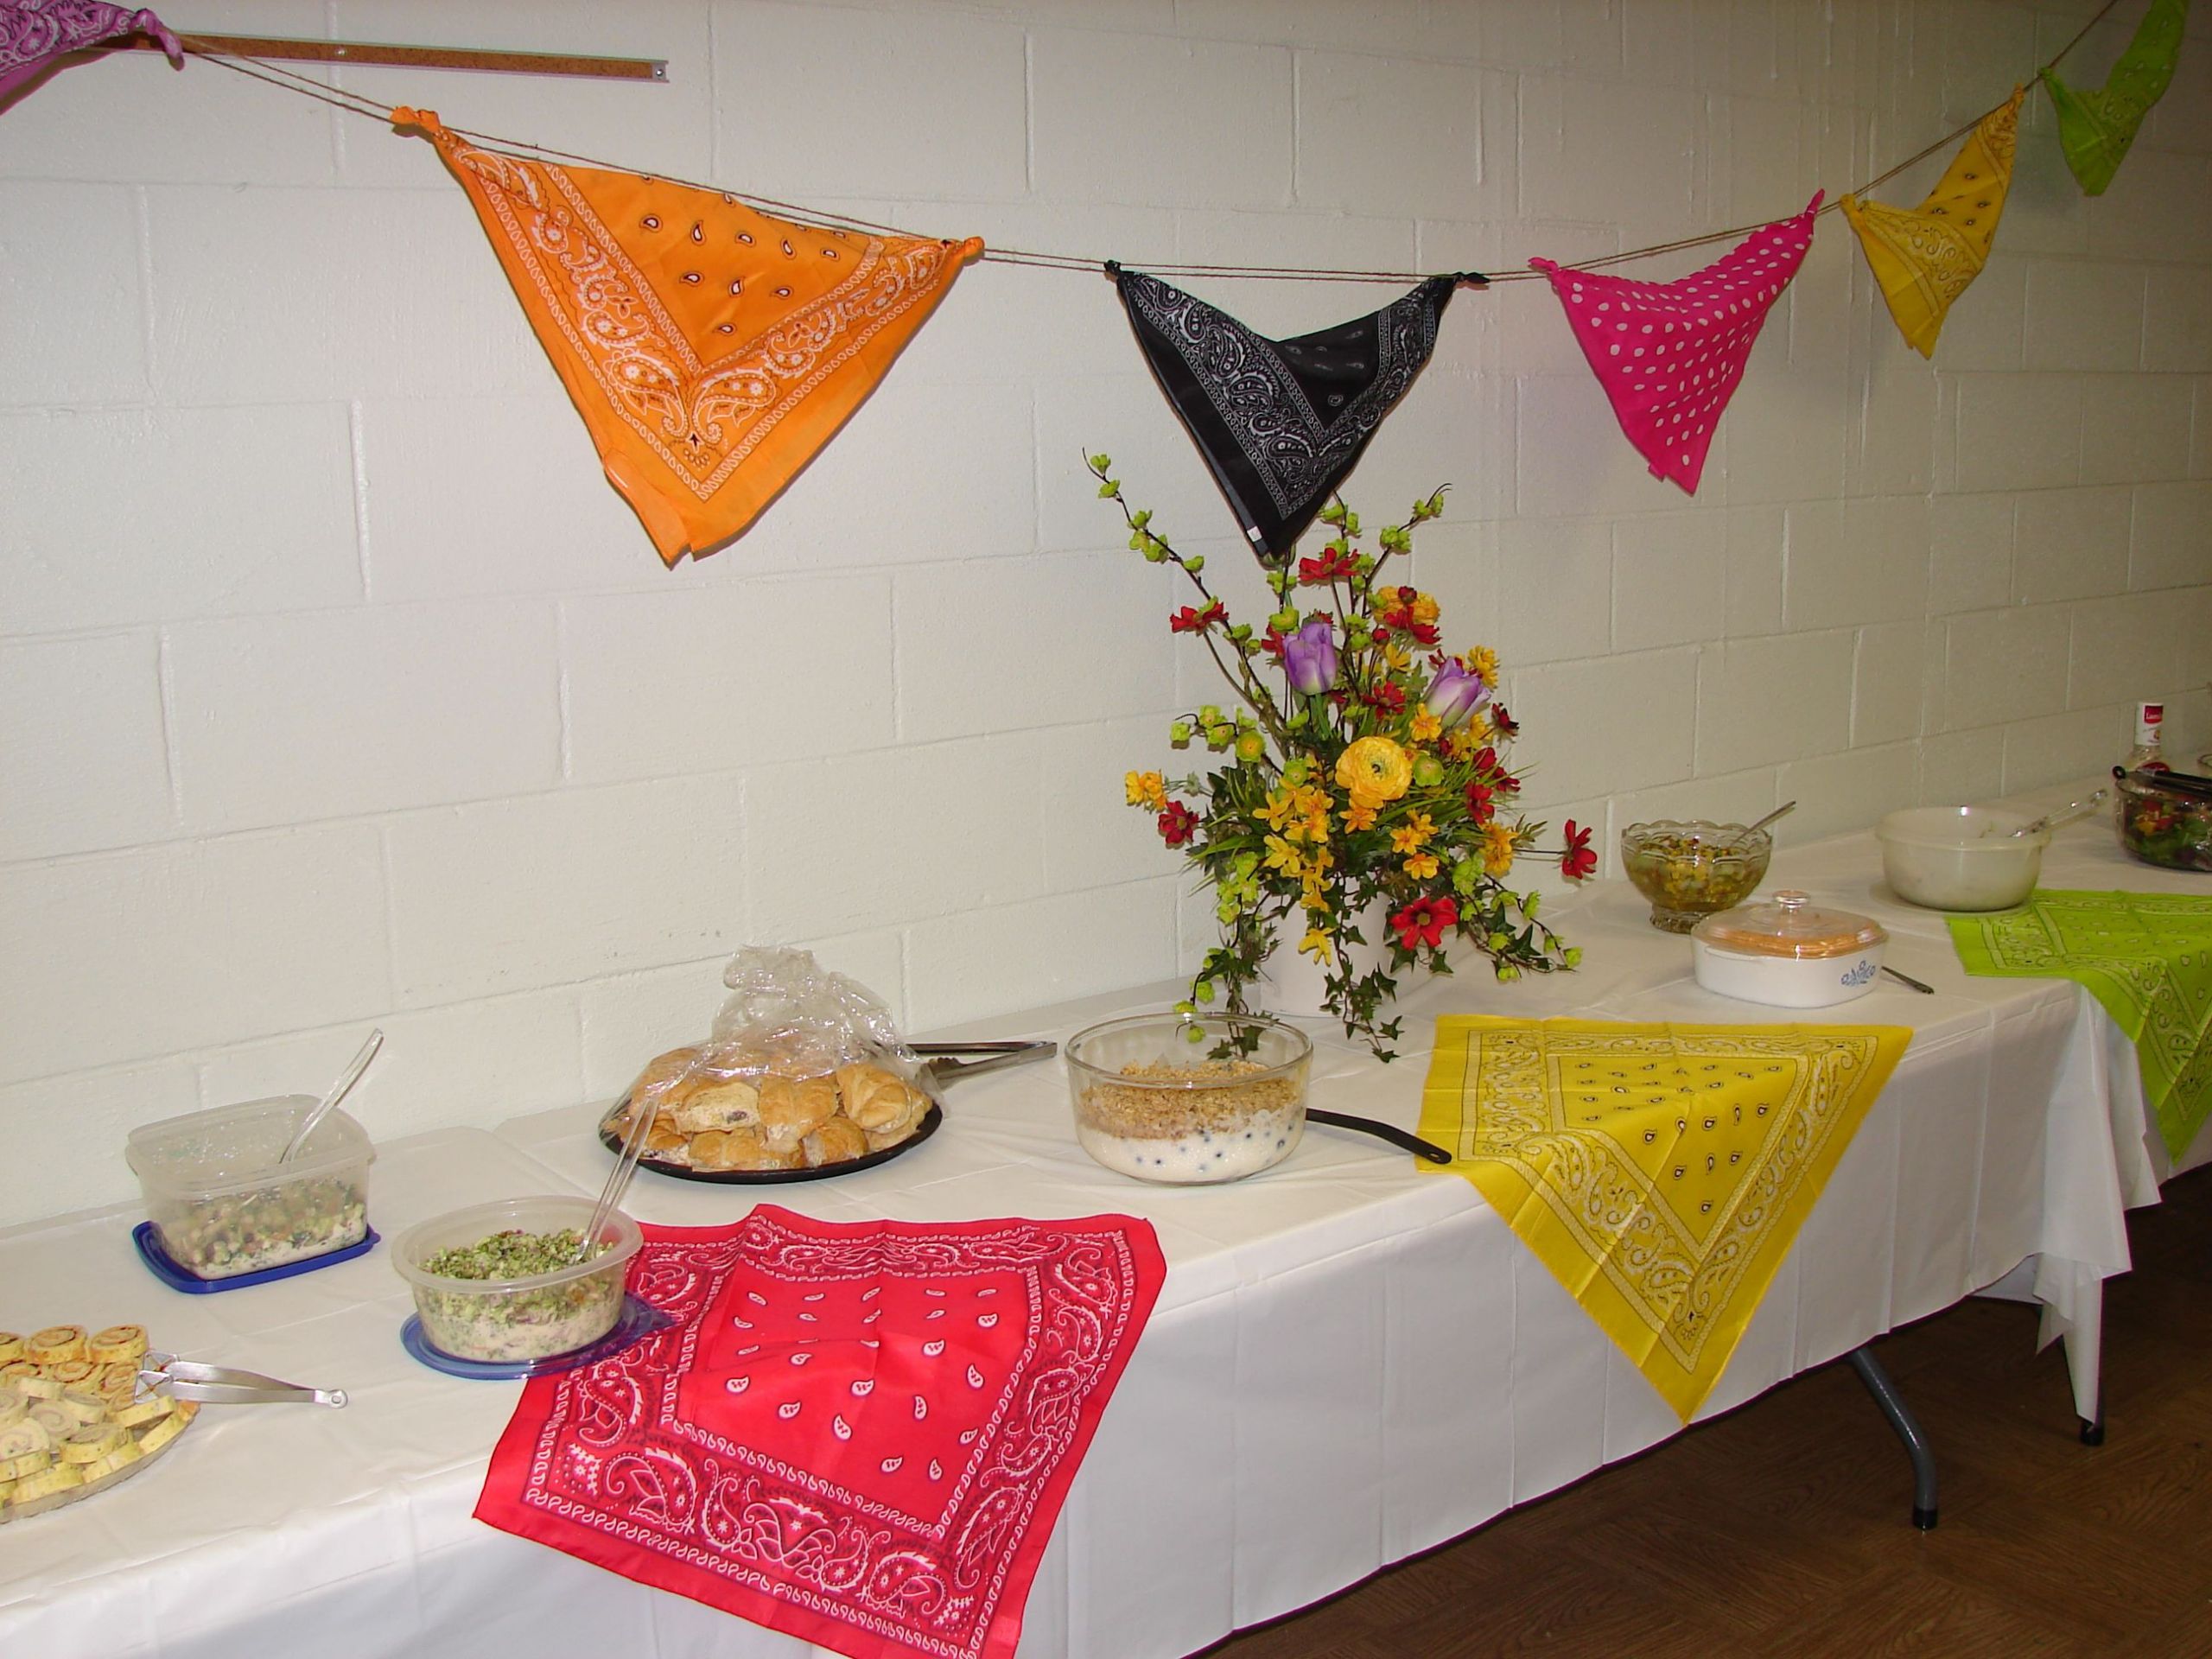 Summer Luncheon Party Ideas
 Summer luncheon Decorations using inexpensive bandana s in